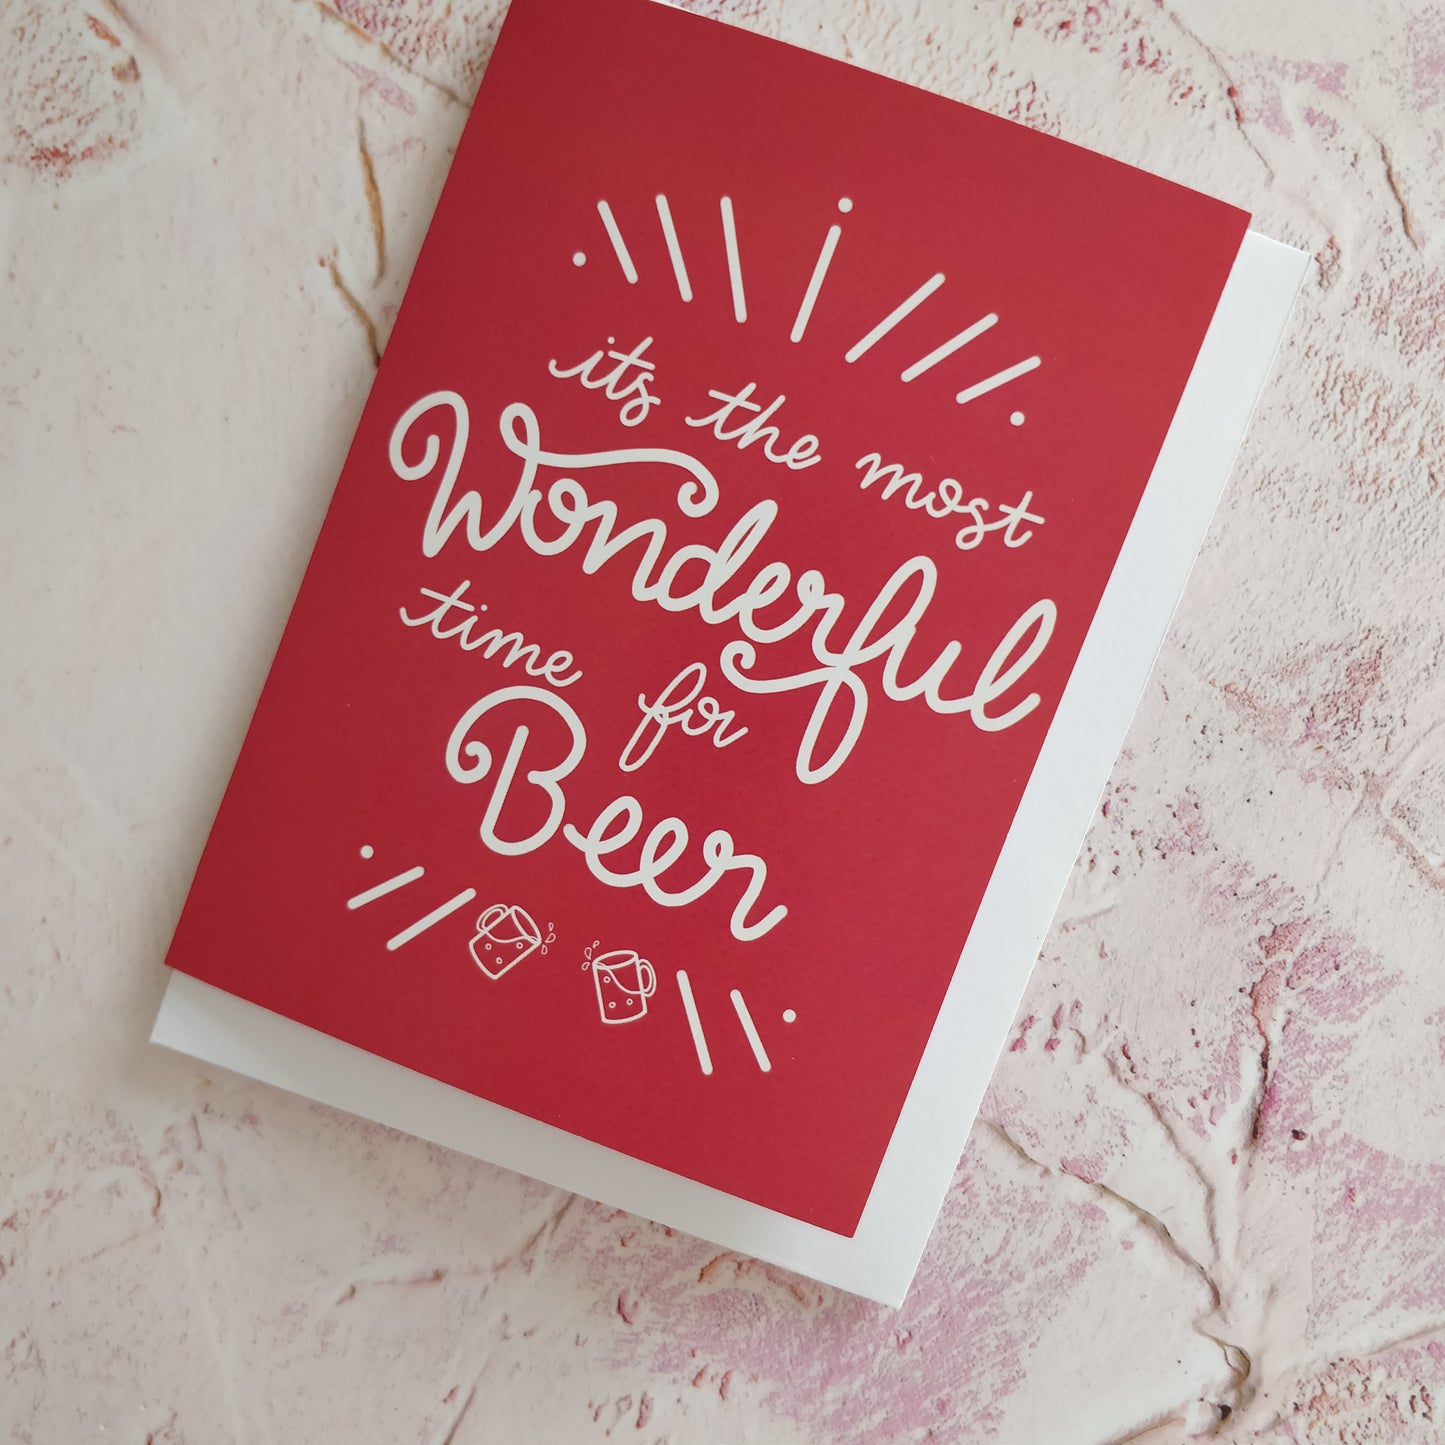 It's the most wonderful time for Beer Christmas Greeting Card - Fay Dixon Design